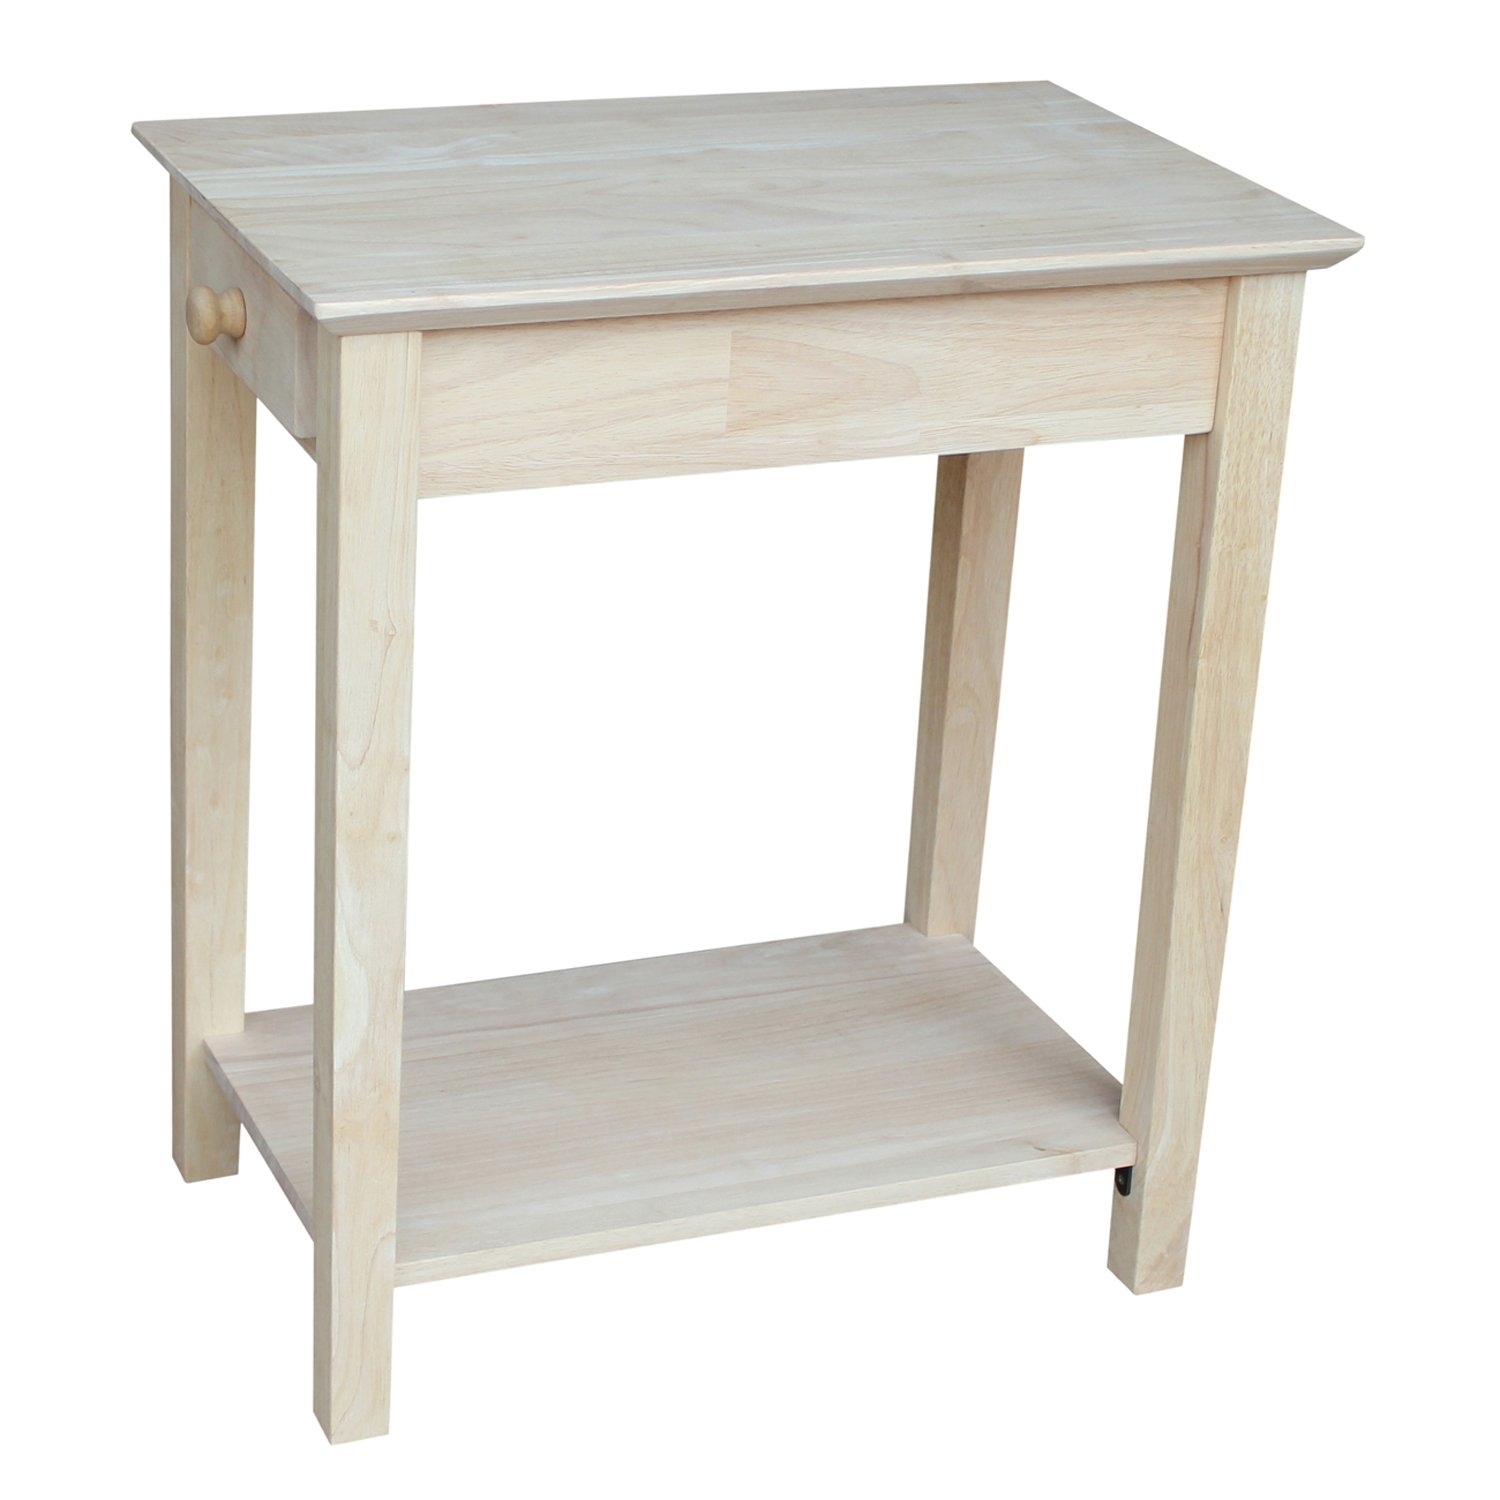 International concepts narrow end table